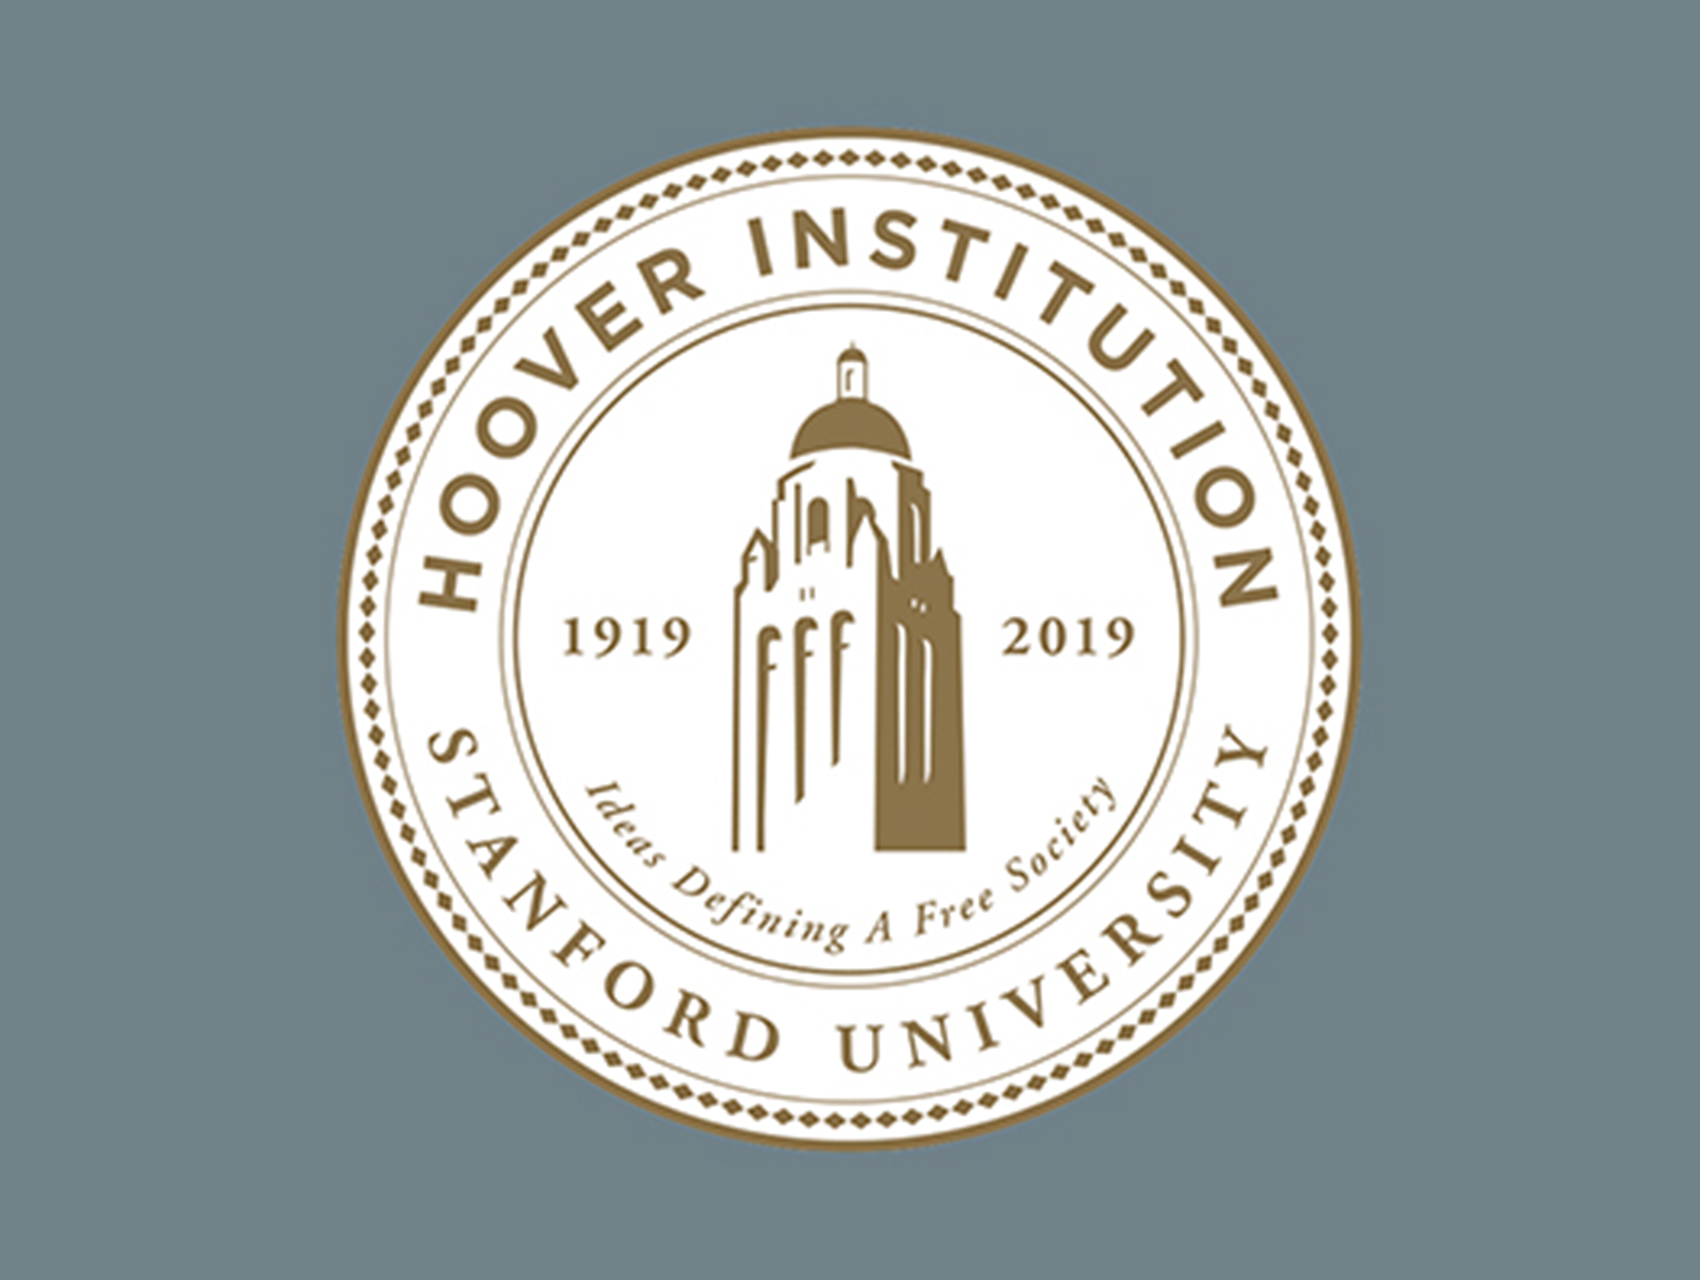 Gold on white centennial seal of the Hoover Institution on a blue gray field